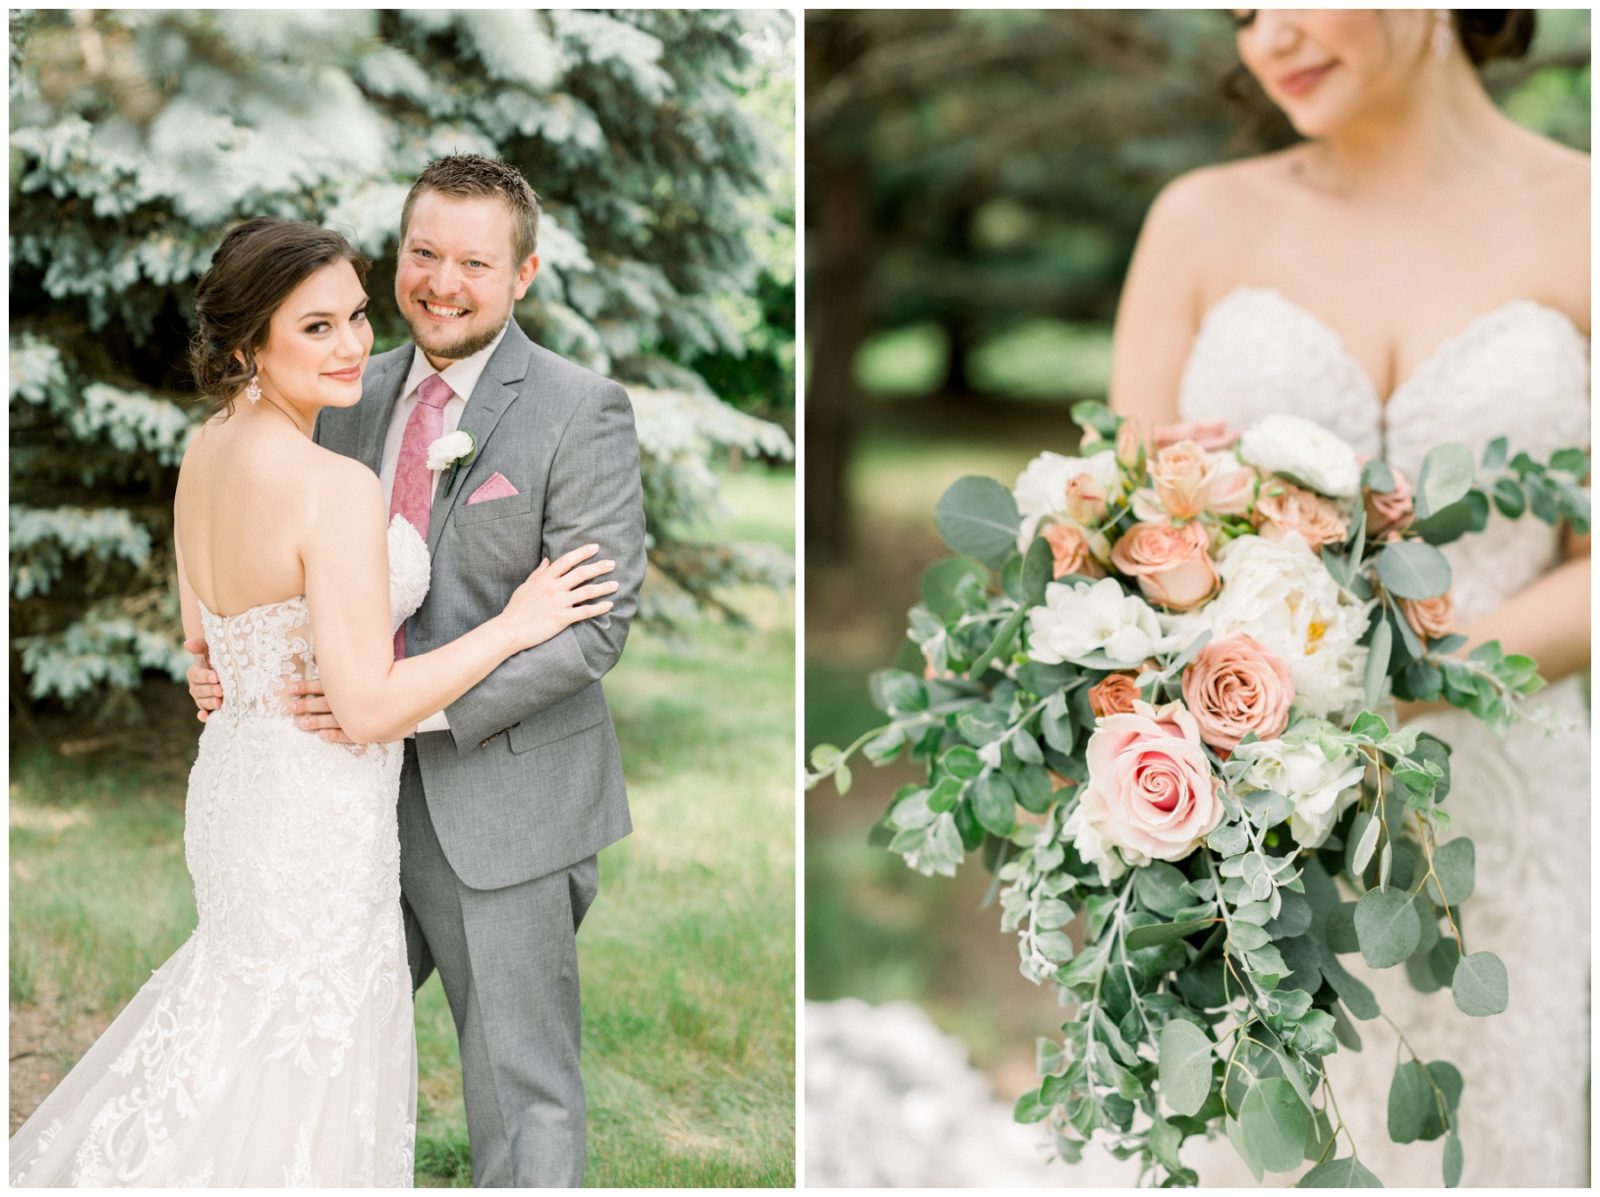 Two photos. One of the bride and groom laughing and the other one of the bride holding a flower bouquet.